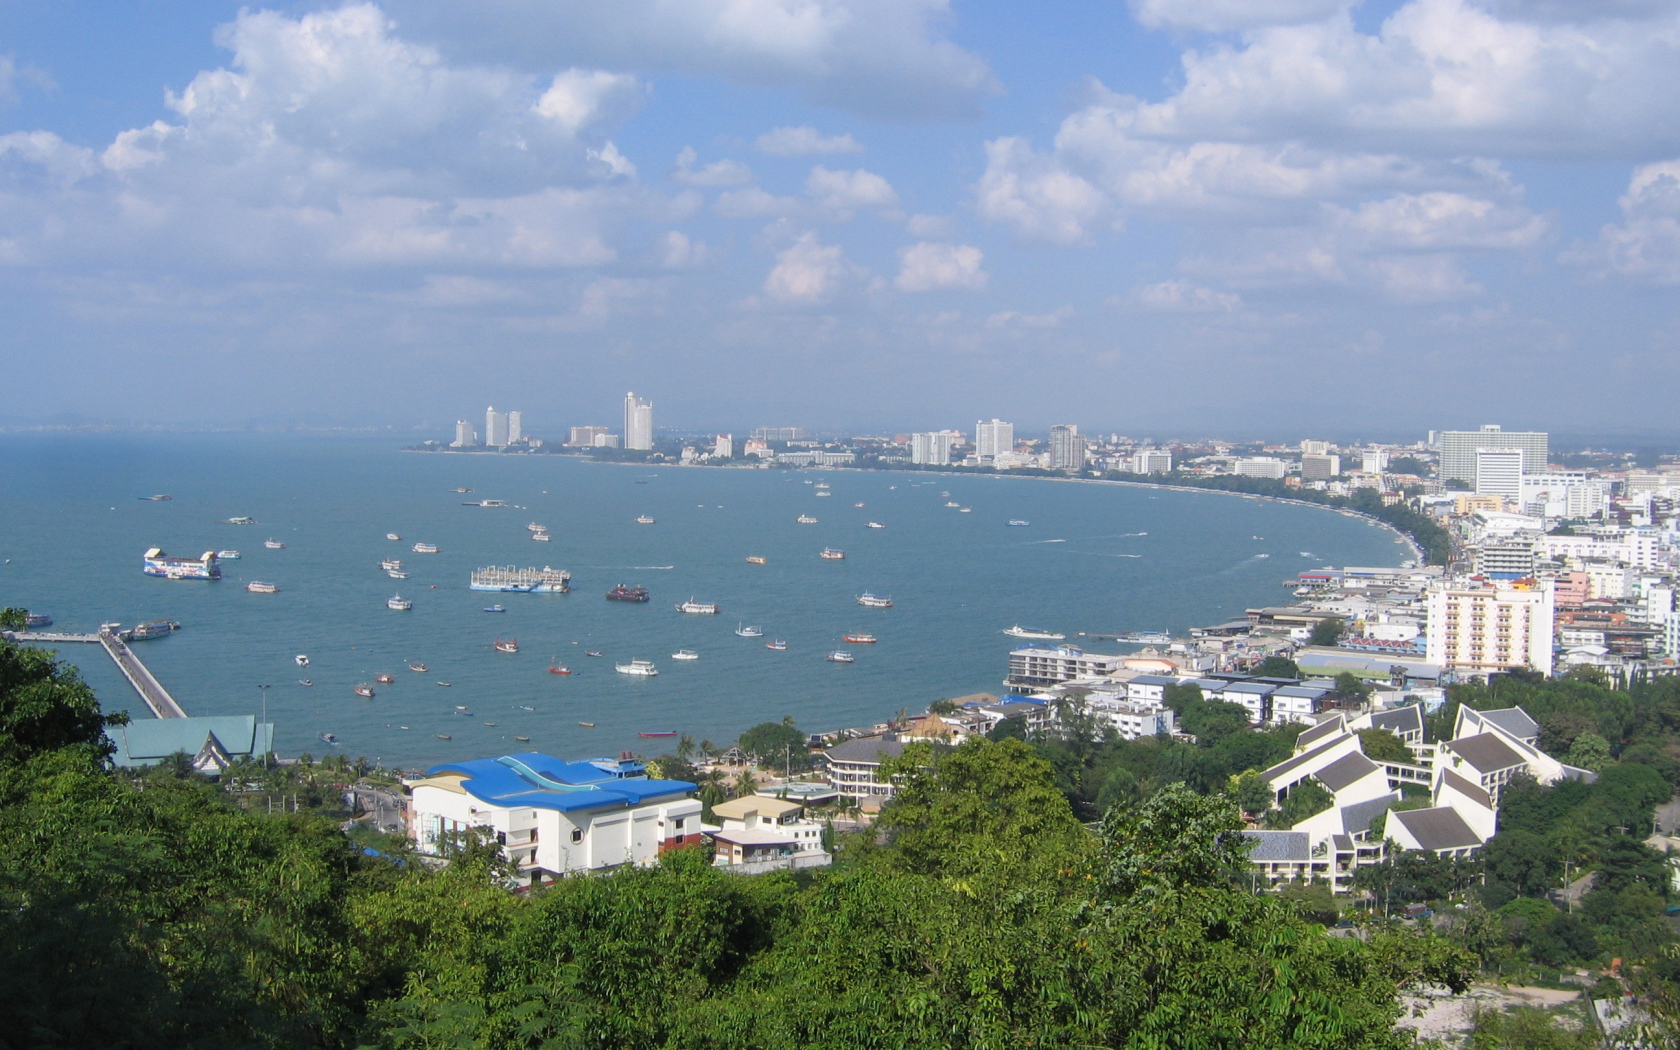 Panorama of the city at a resort in Pattaya, Thailand